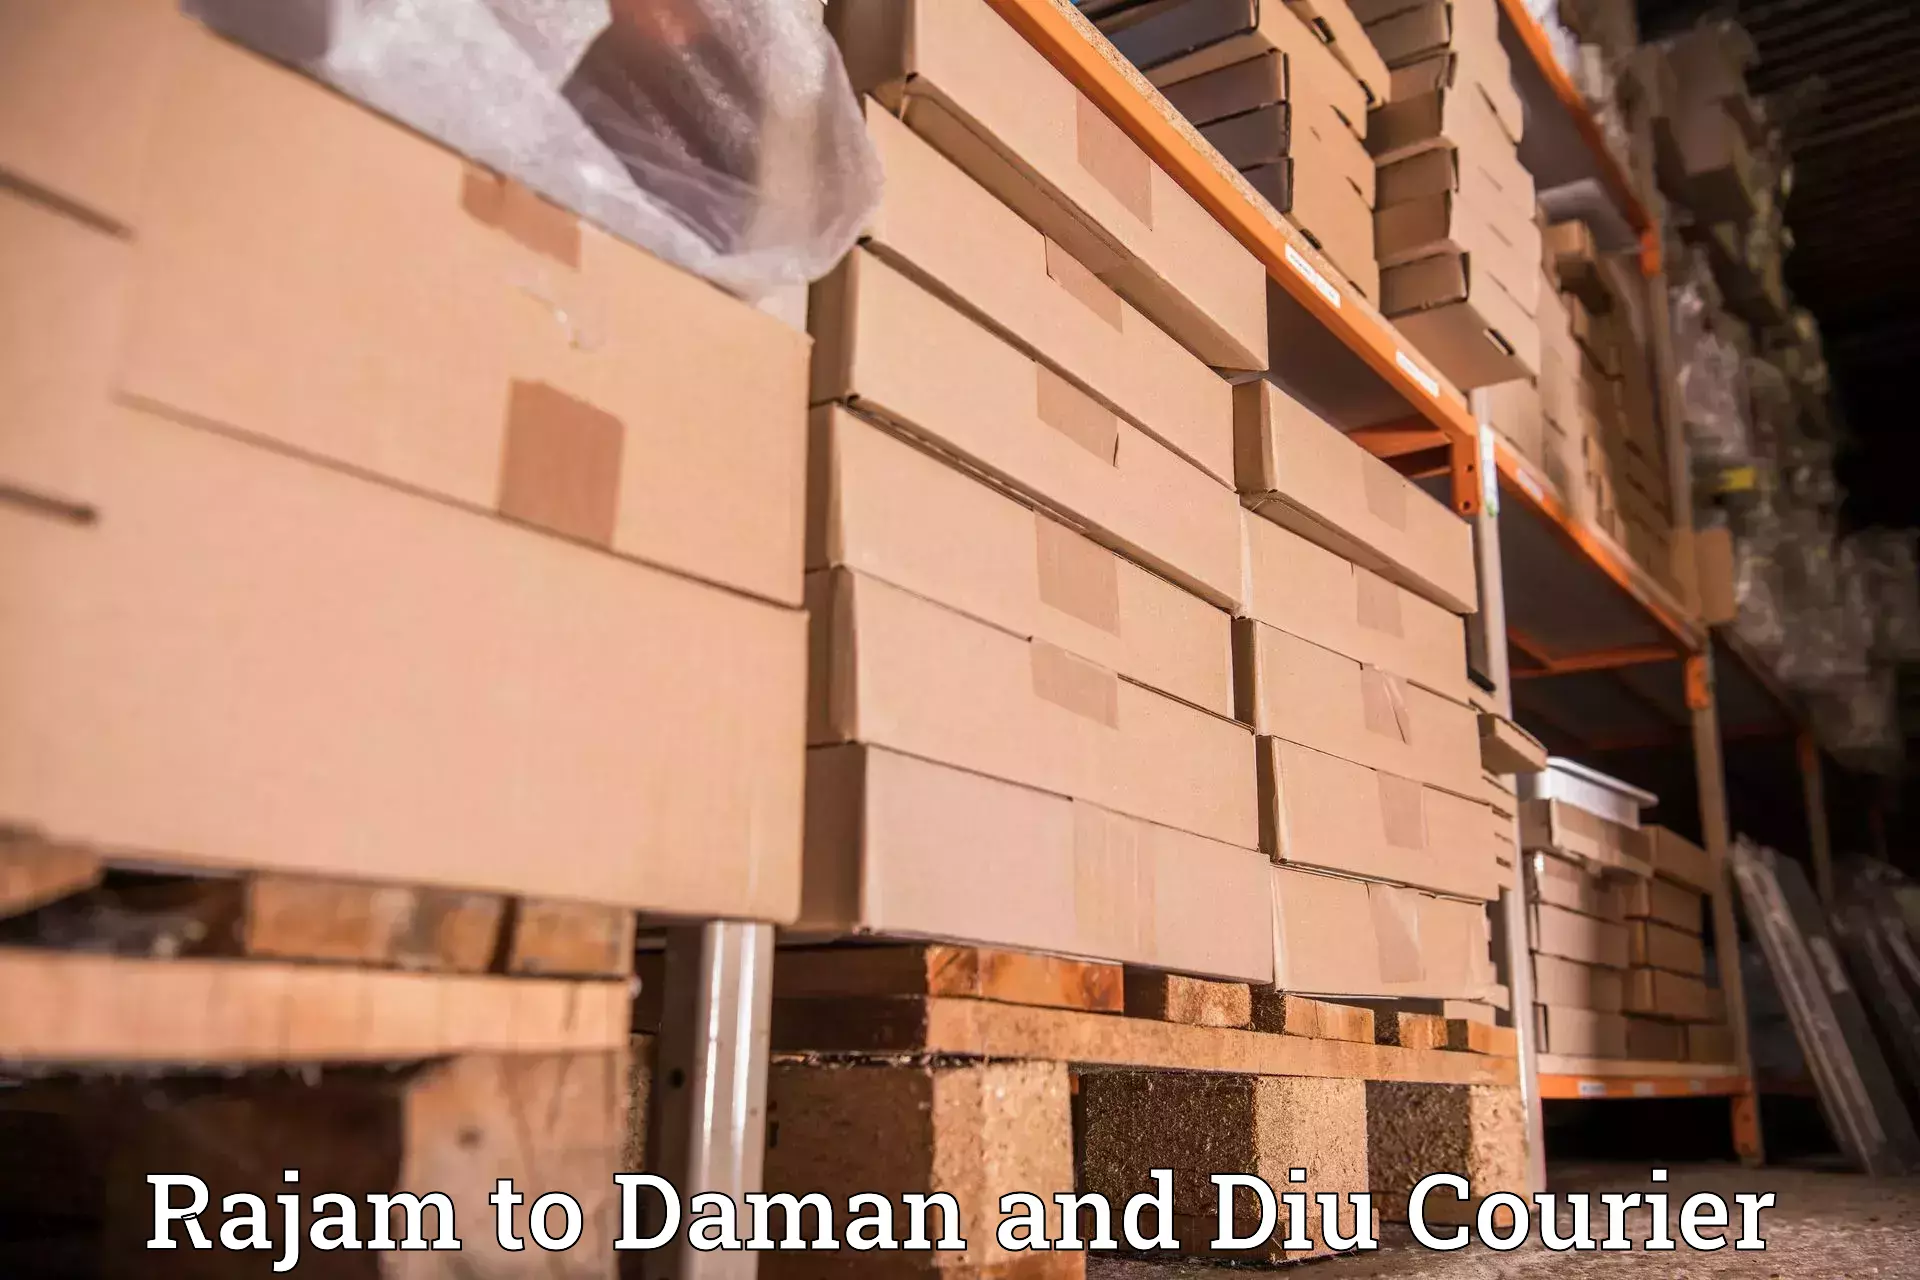 Dynamic courier operations in Rajam to Diu